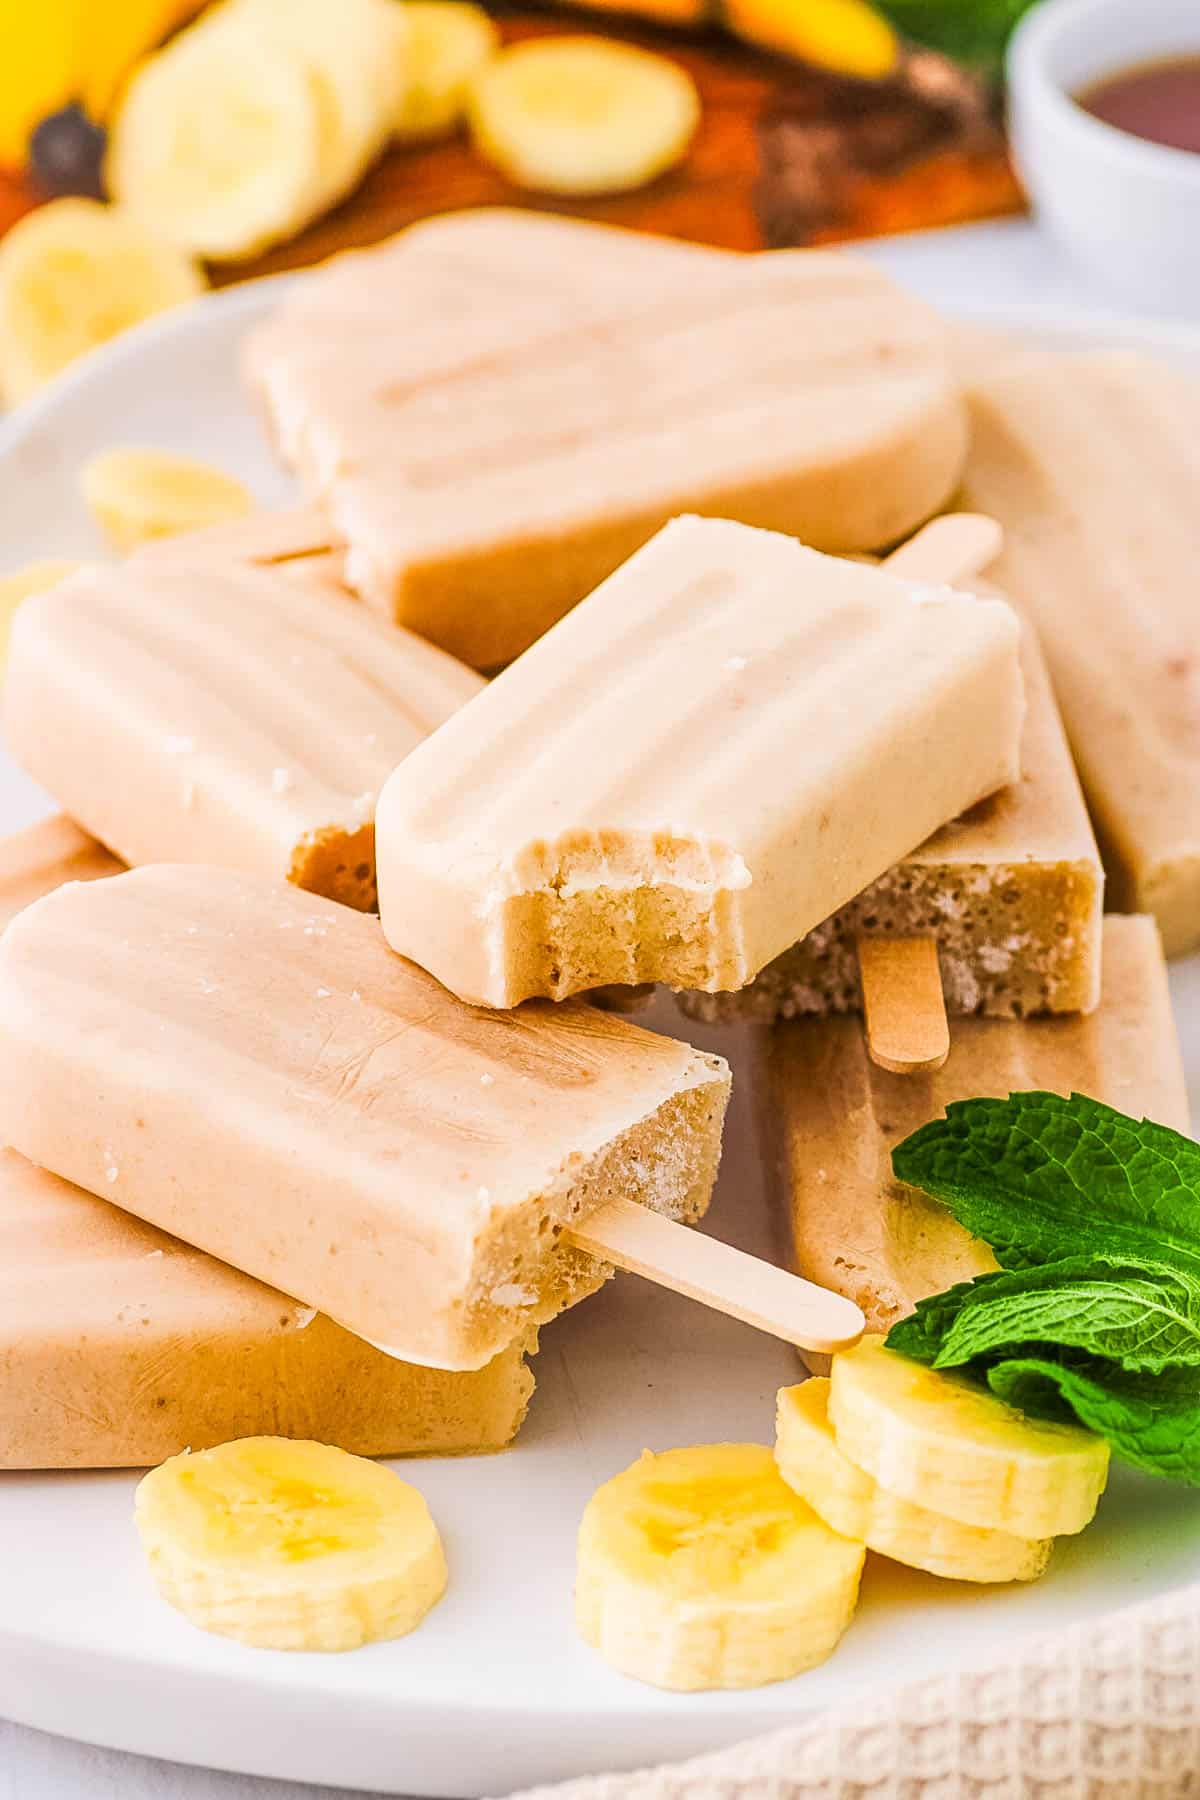 Banana popsicles served on a white tray with a bite taken out of one popsicle.